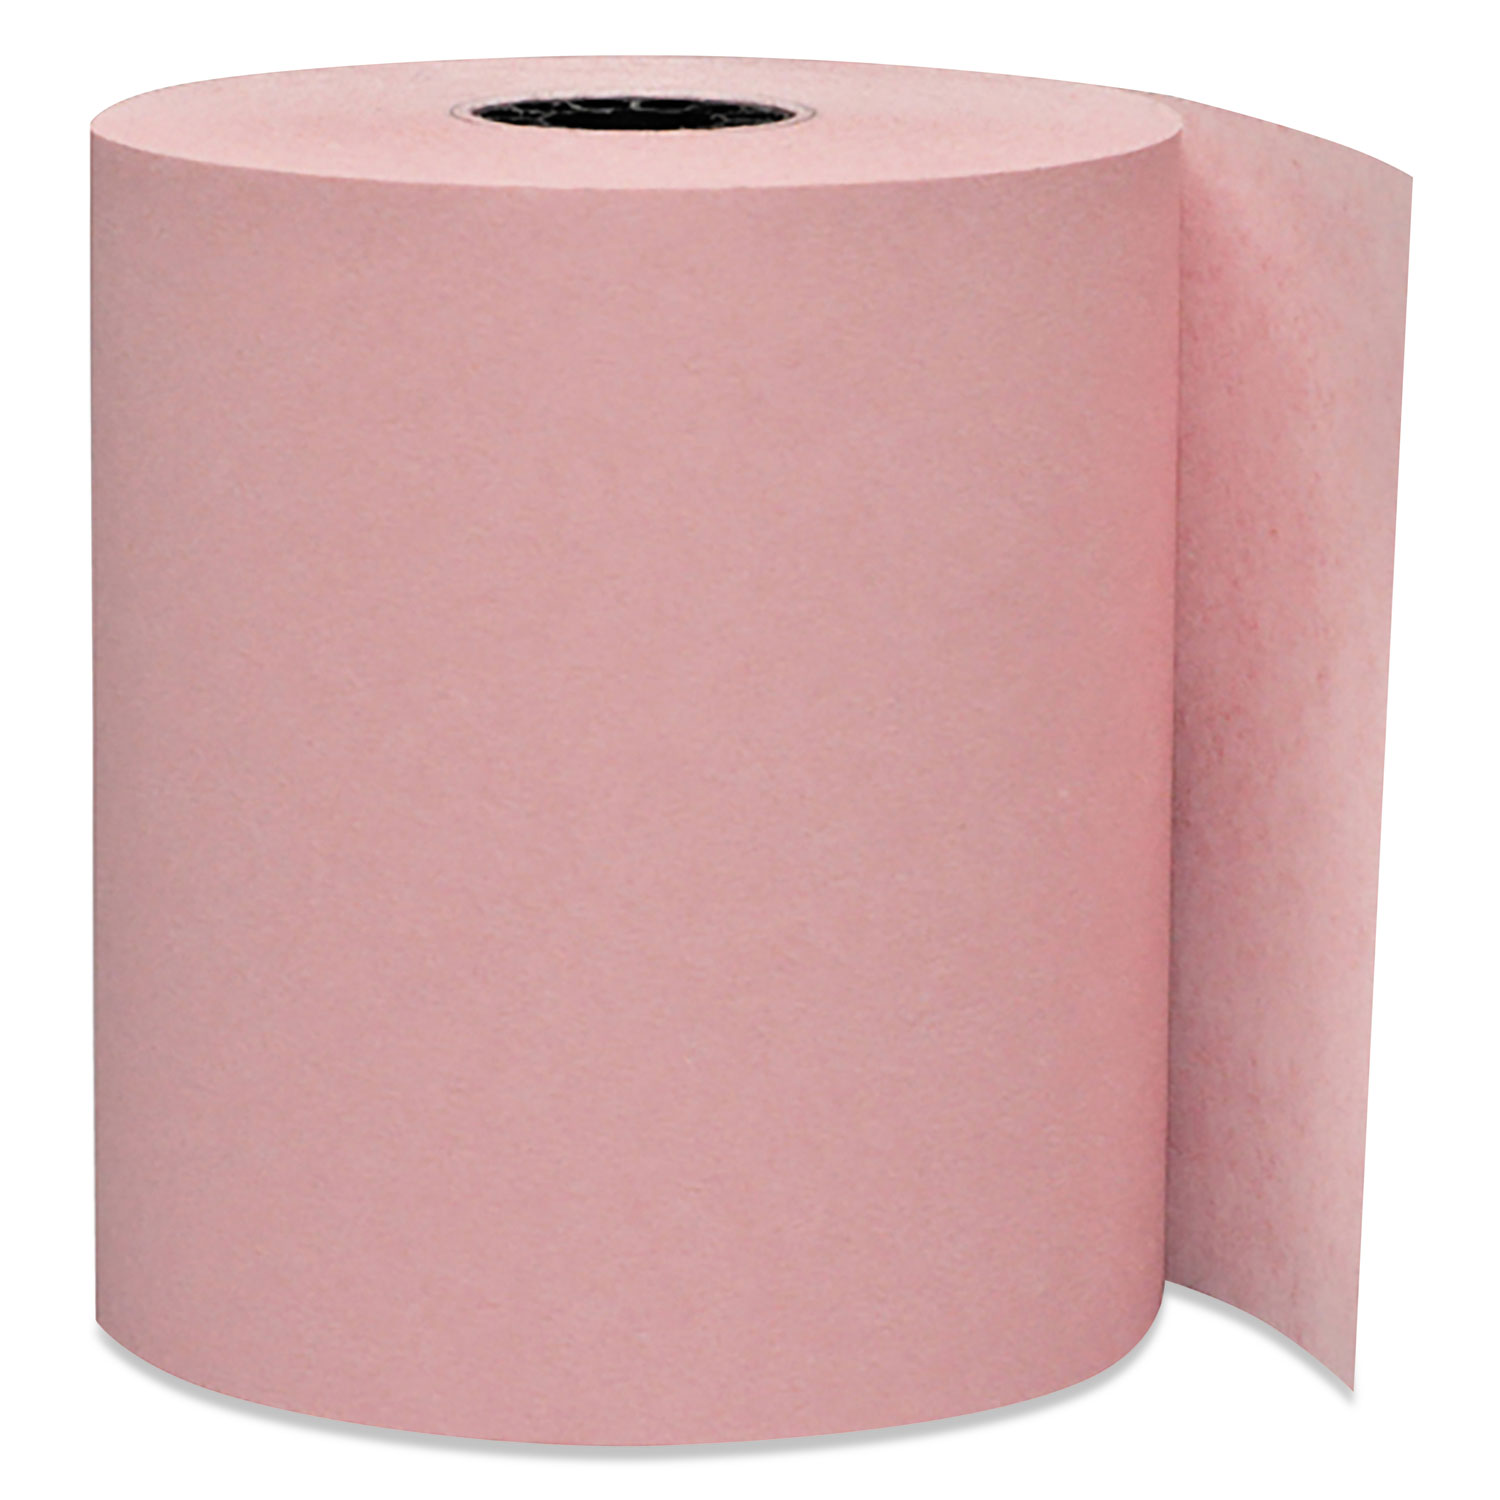 Direct Thermal Printing Thermal Paper Rolls, 3 1/8 x 230 ft, Pink, 50/Carton